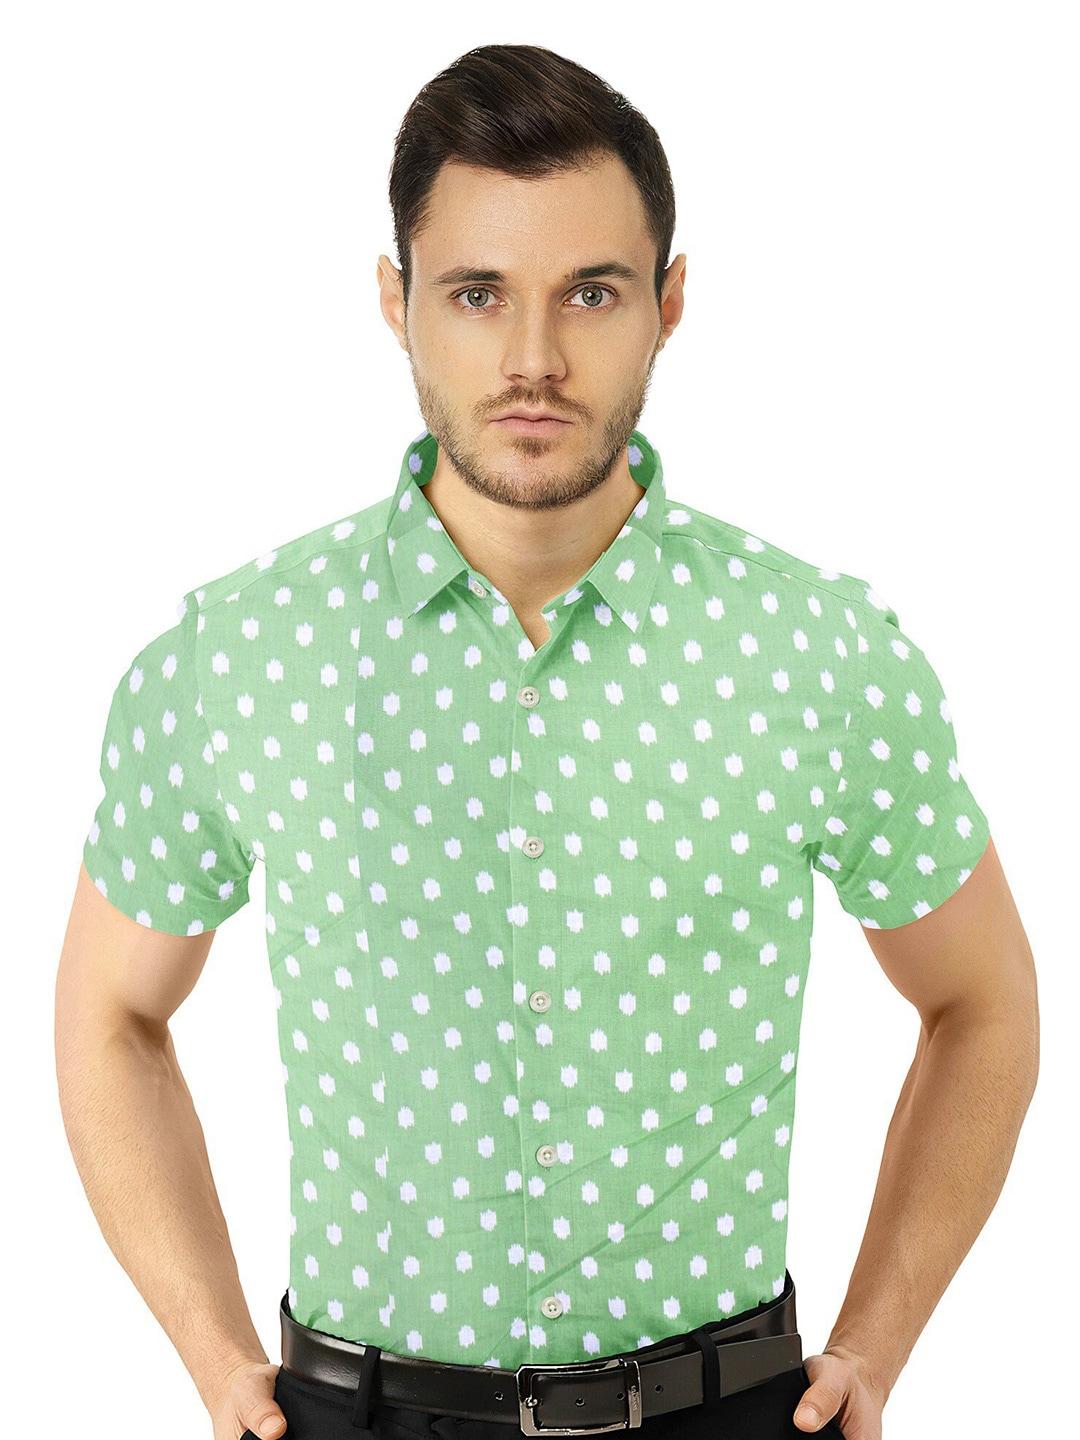 misbis relaxed slim fit opaque printed casual shirt